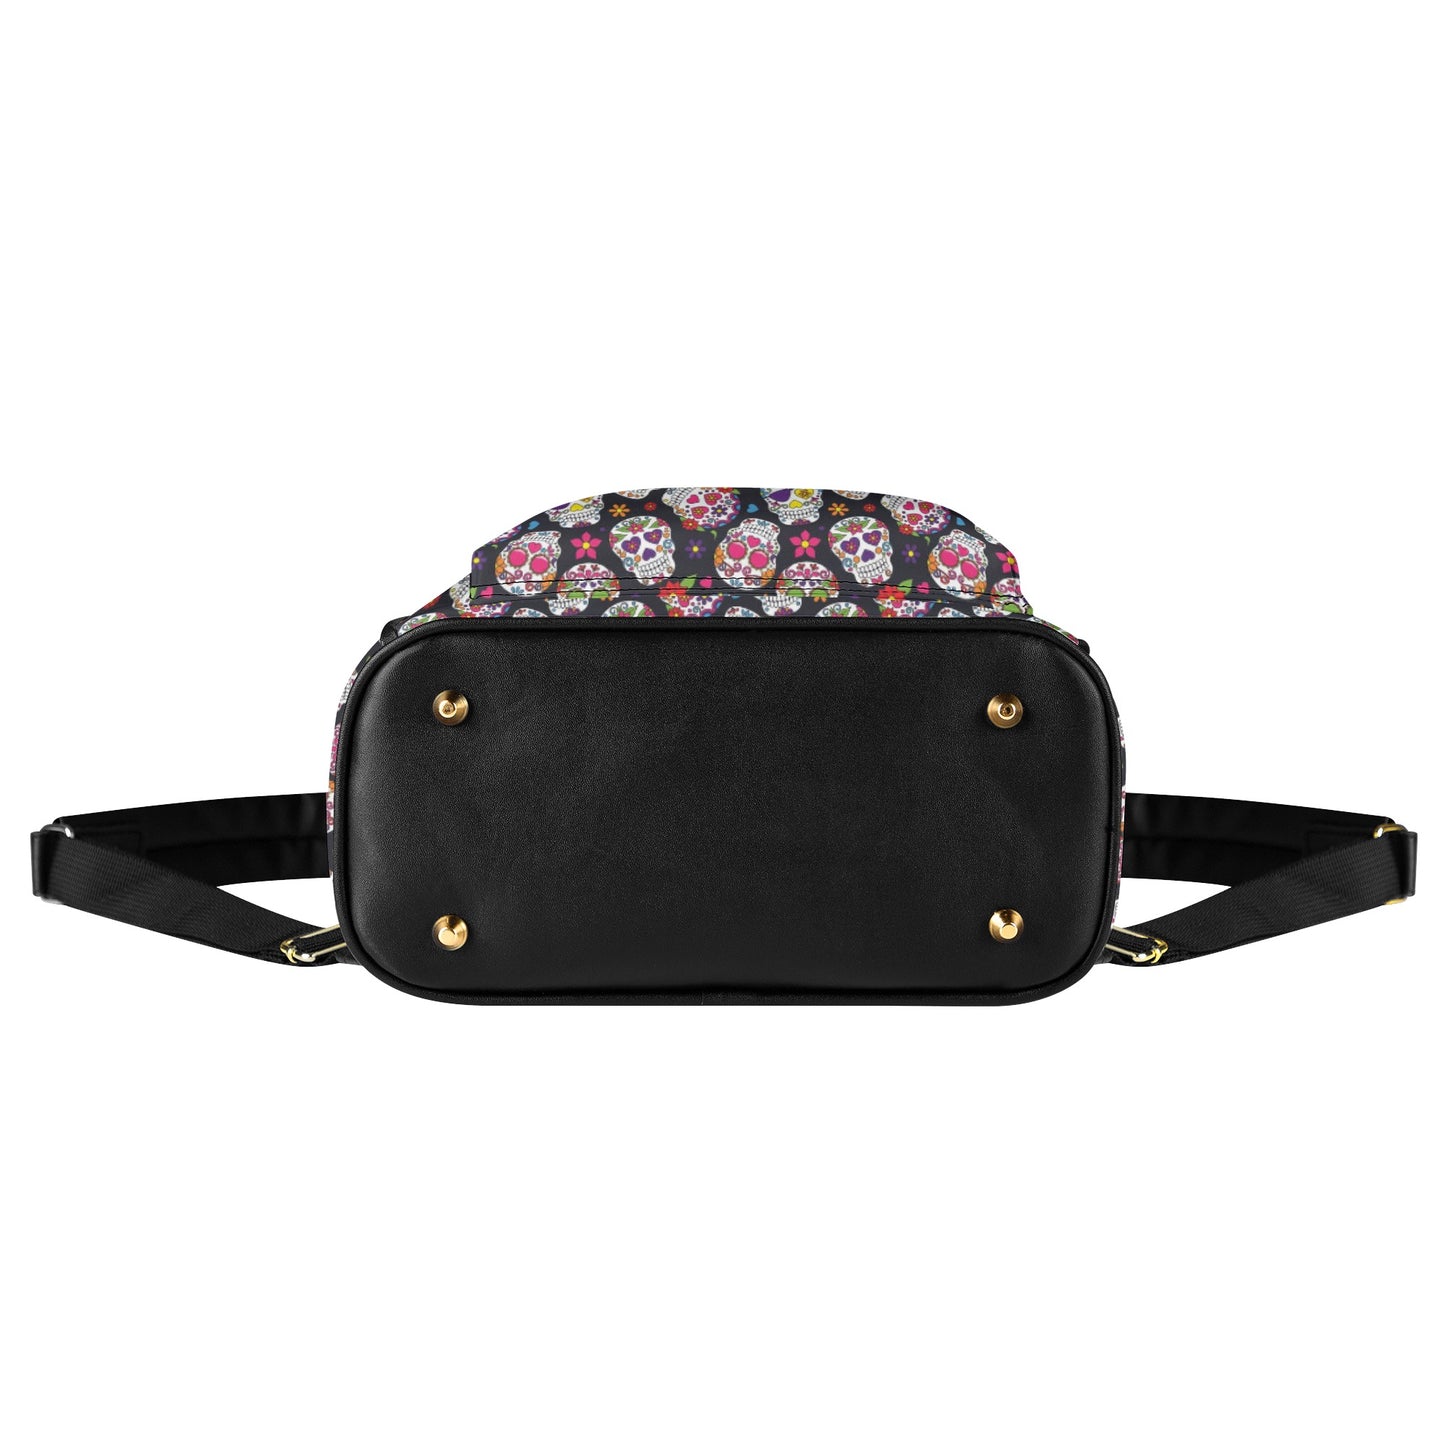 Day of the dead sugar skull Women's Casual PU Backpack